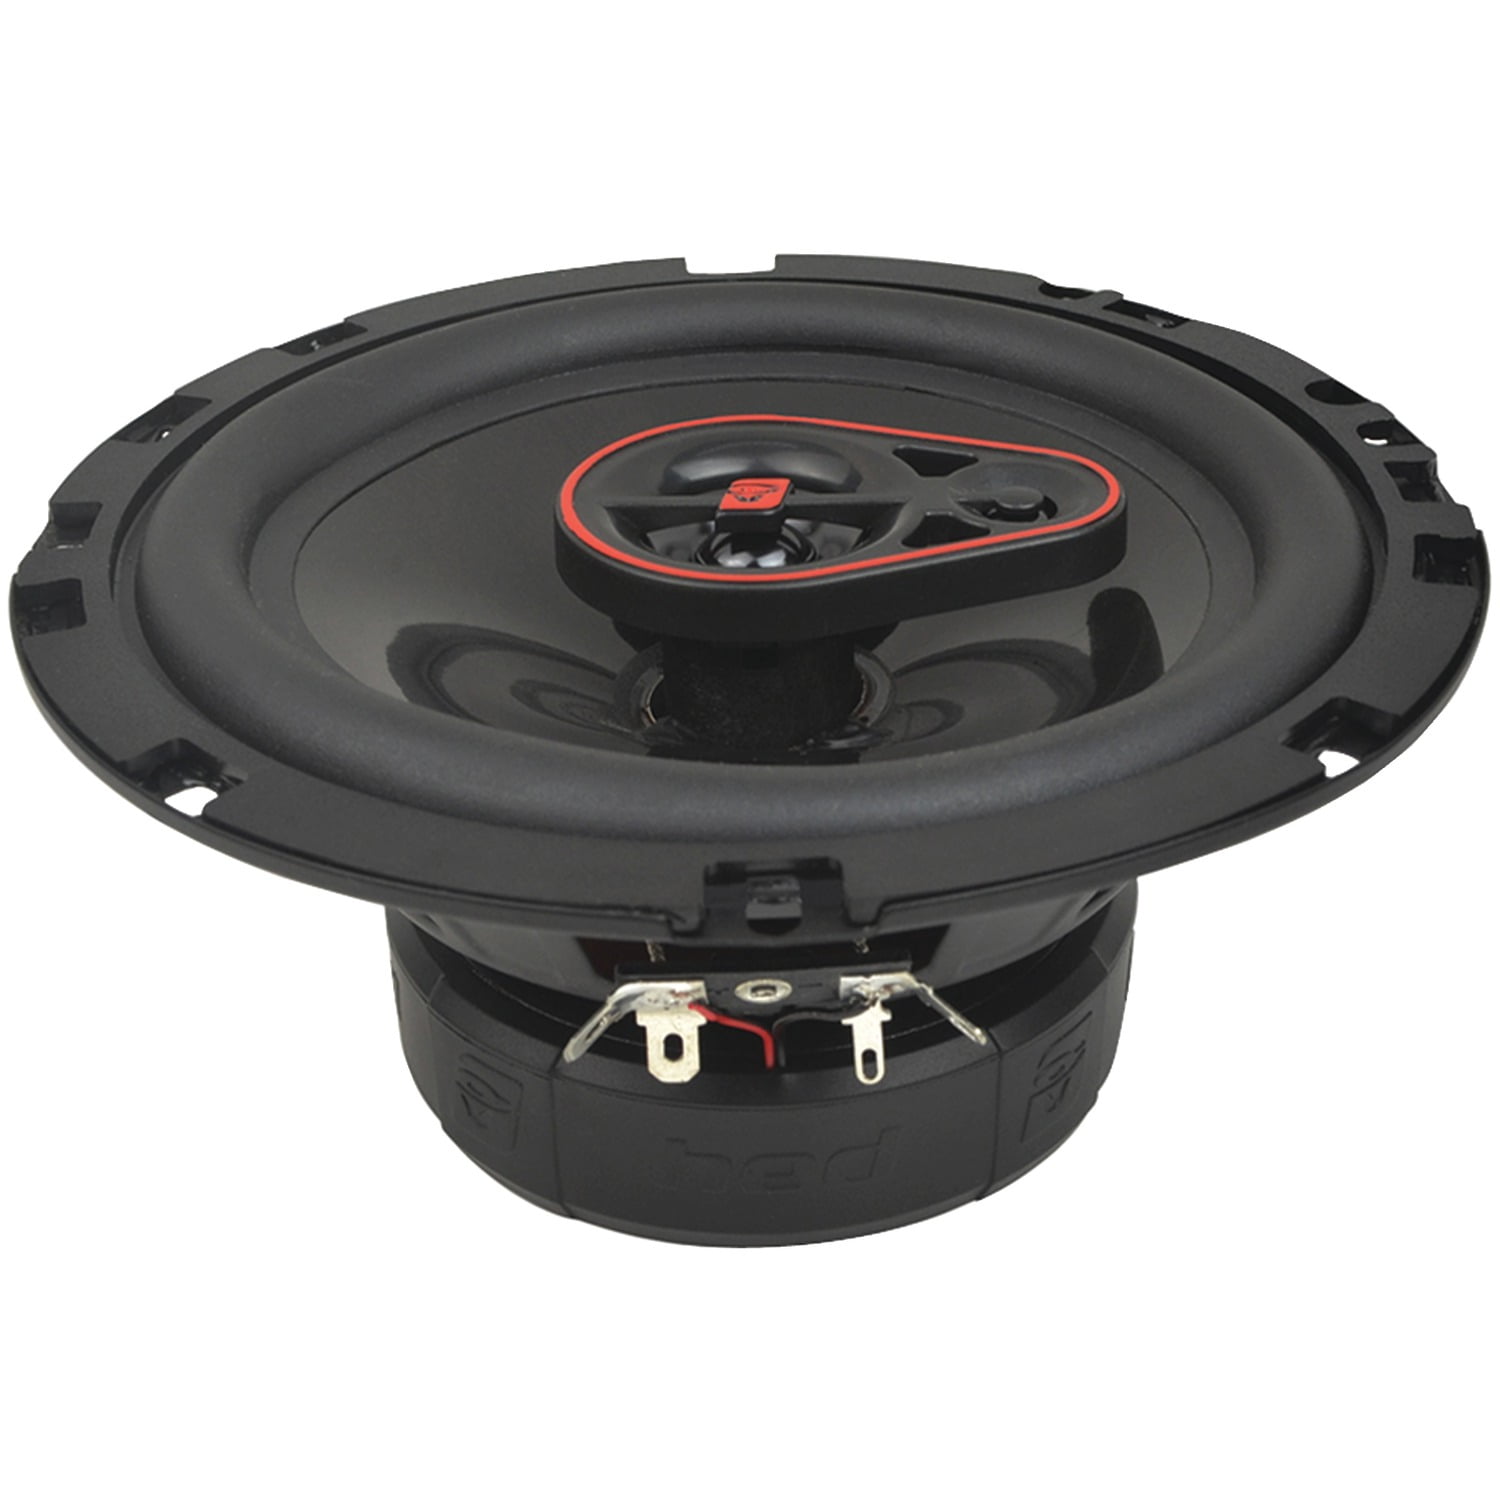 CERWIN-VEGA(R) MOBILE H7653 HED Series 3-Way Coaxial Speakers (6.5